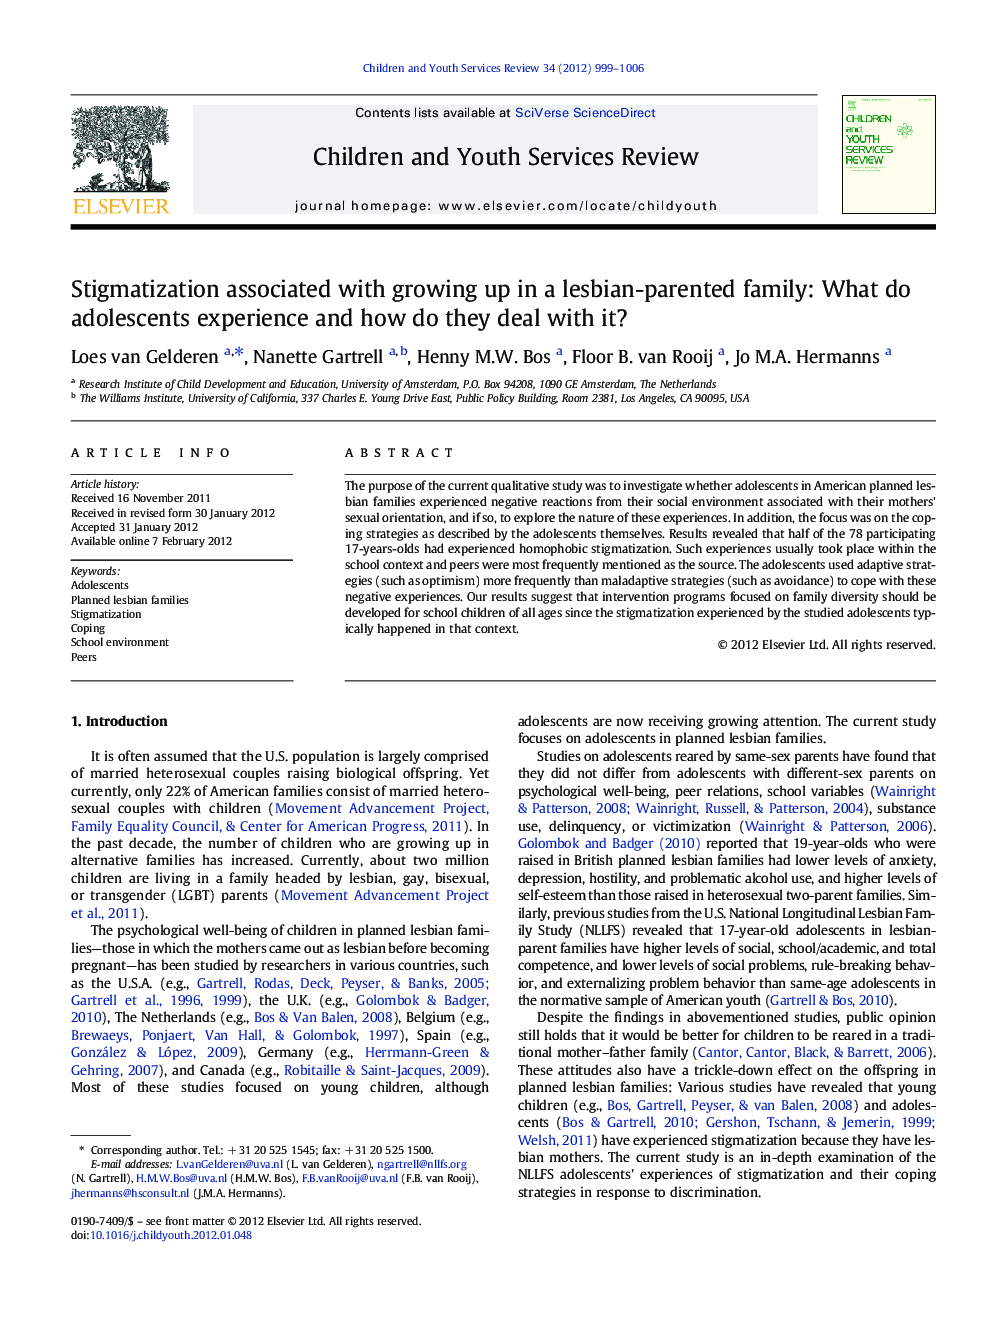 Stigmatization associated with growing up in a lesbian-parented family: What do adolescents experience and how do they deal with it?